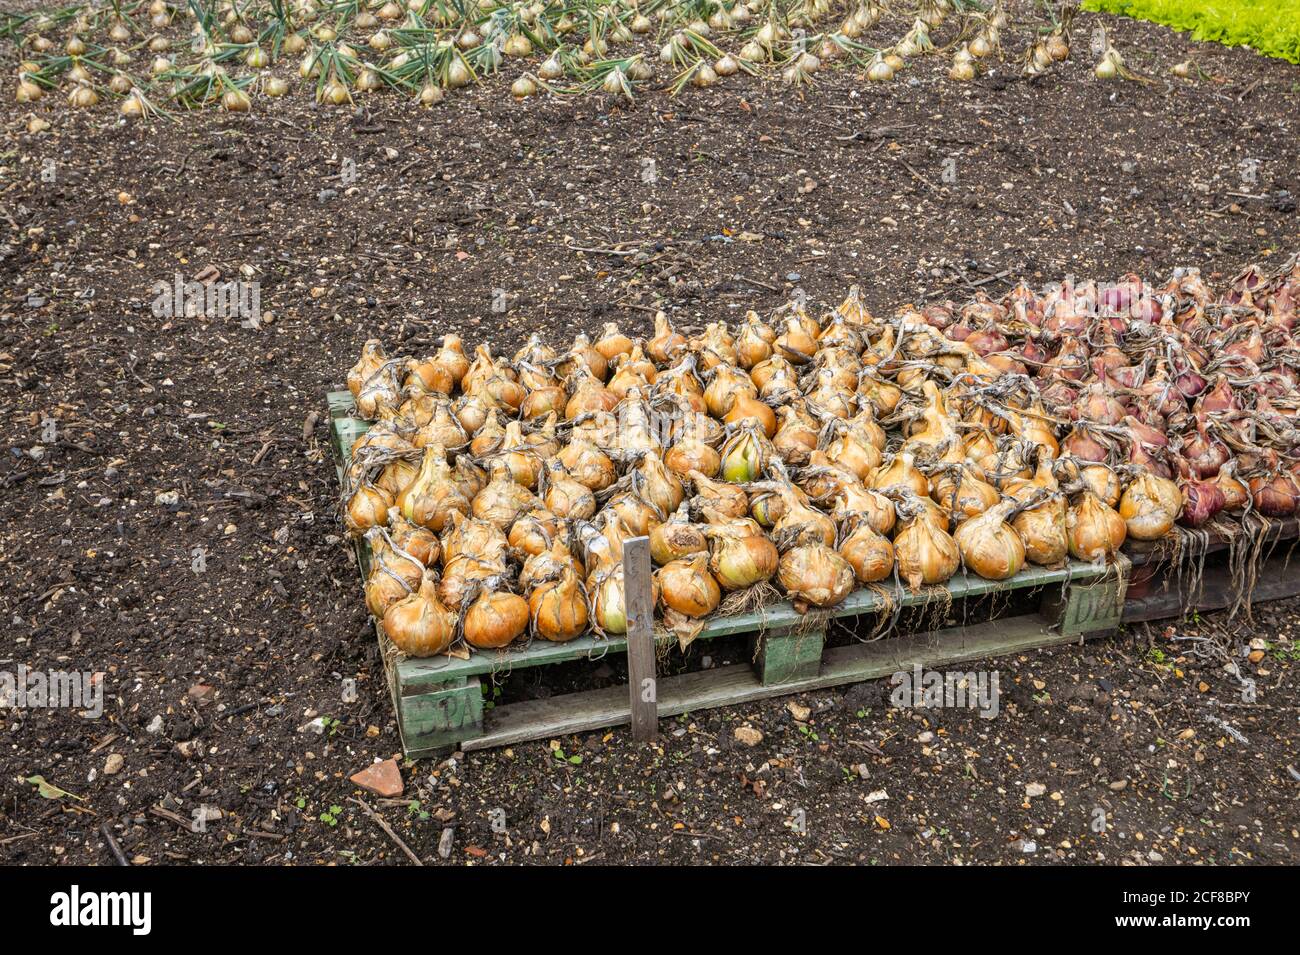 Onions growing and lifted to dry after harvesting in a kitchen garden, Hampshire, southern England in late summer / early autumn Stock Photo